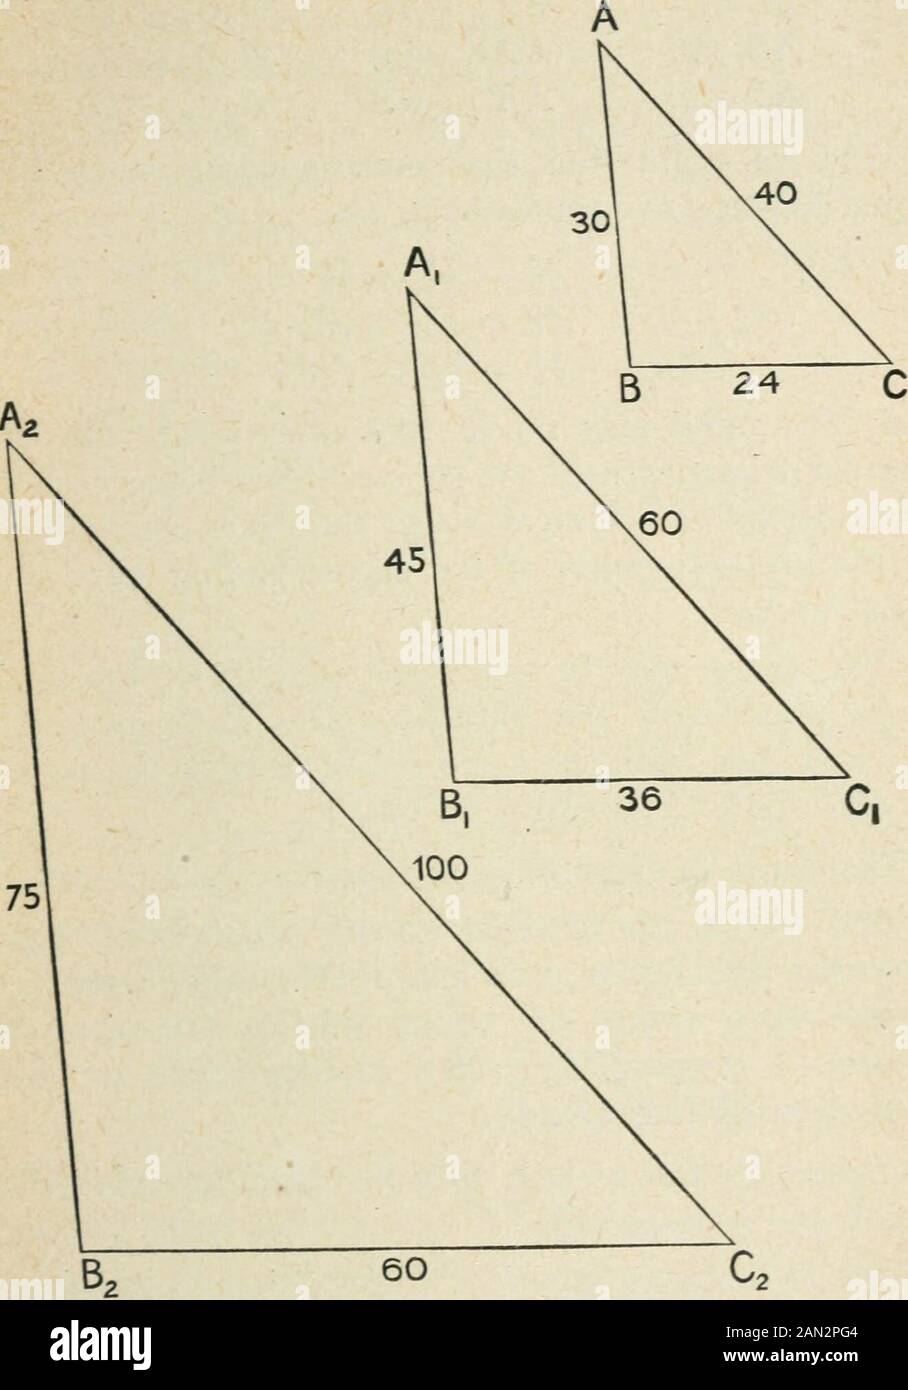 Elementary Plane Geometry Inductive And Deductive By Alfred Baker Ao Are Equal Toone Another Hence The Three Triangles Are Equiangu Lar And Similar Now Measure The Lengths Of The Sides